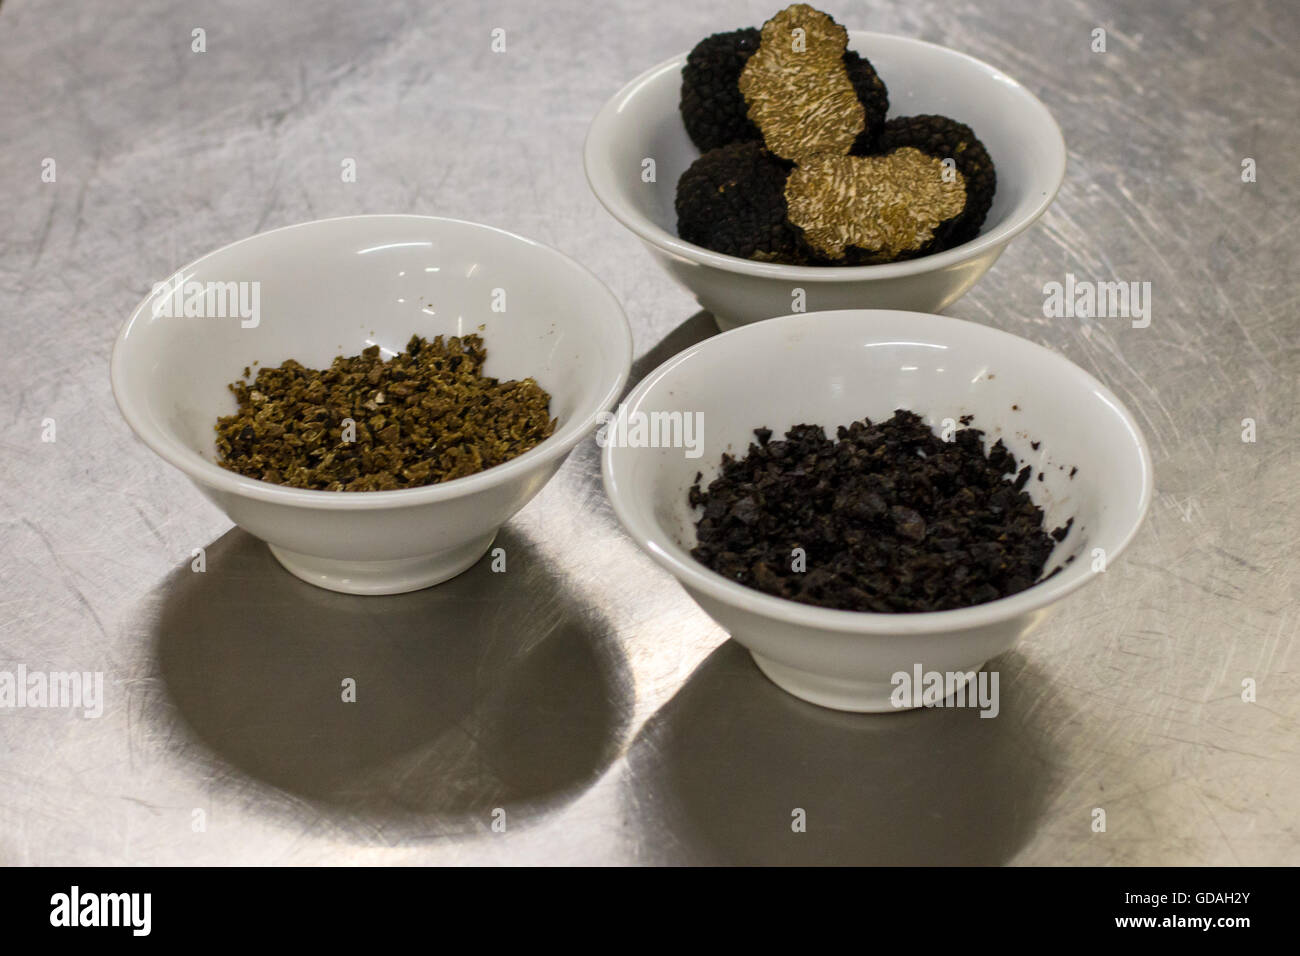 3 bowls of truffle, black truffle and minced truffle on a kitchen counter at Crillon-le-Brave, France. Stock Photo